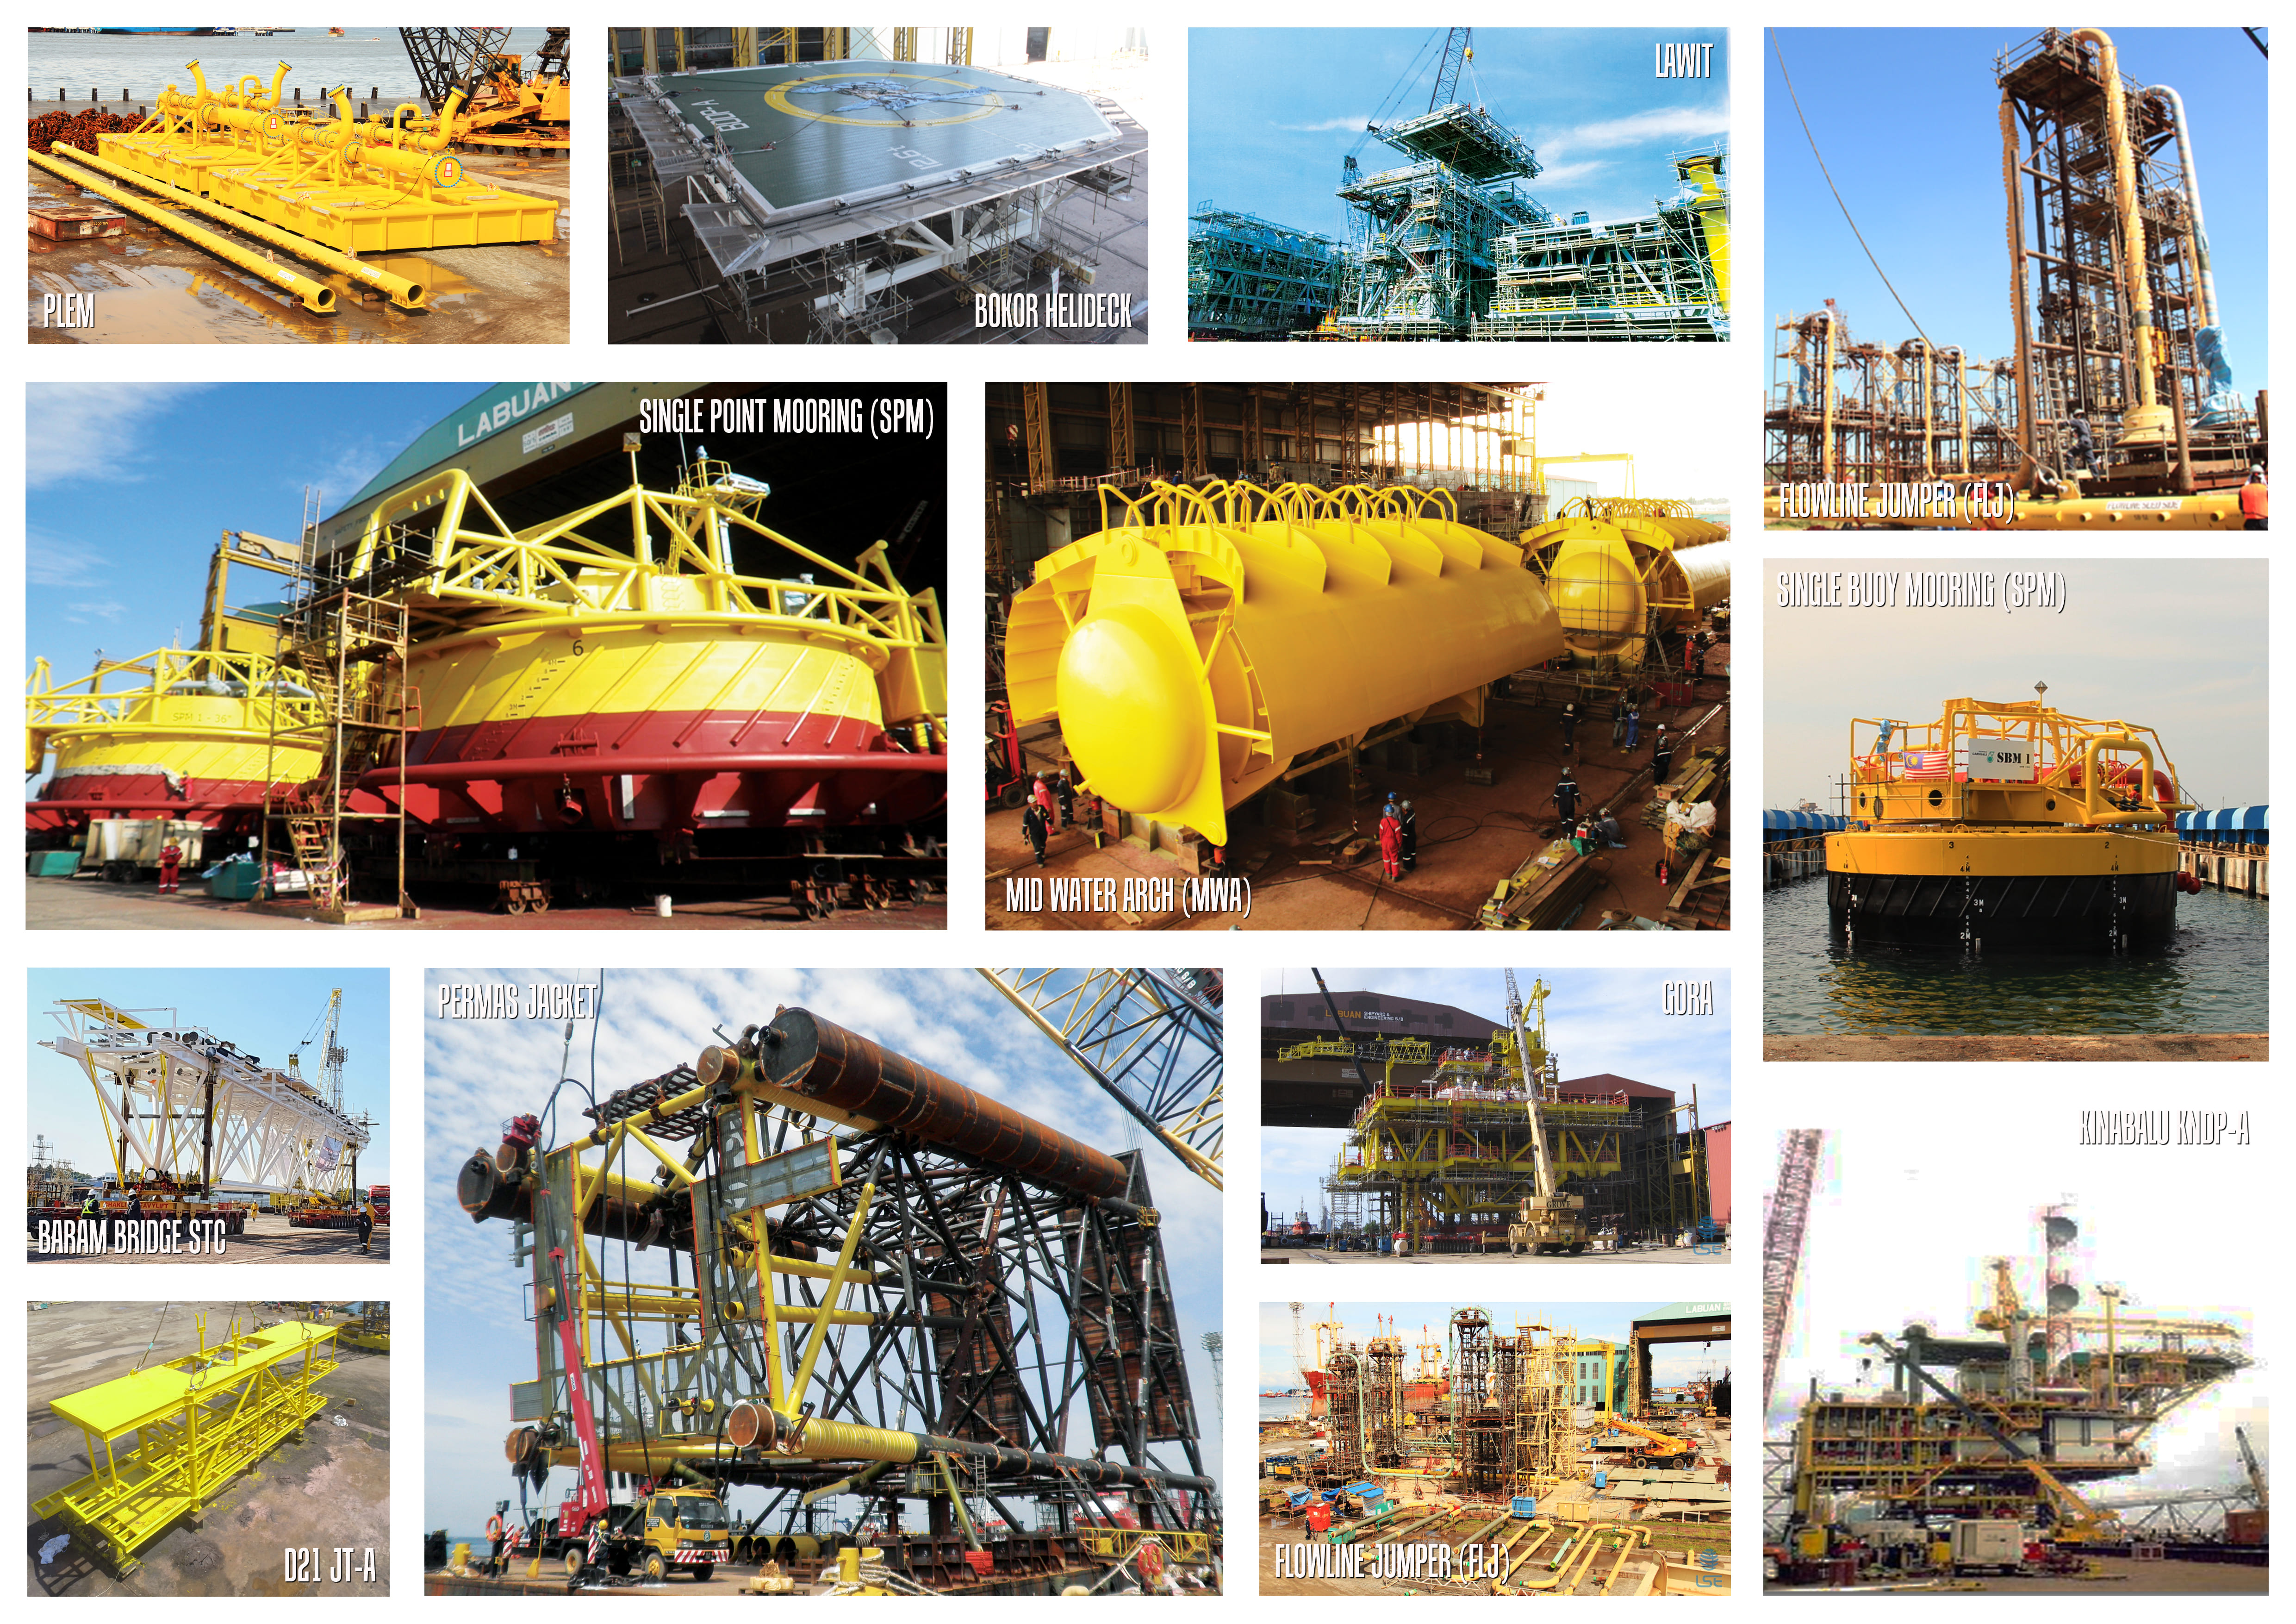 LSE Fabricates various Oil & Gas Structures